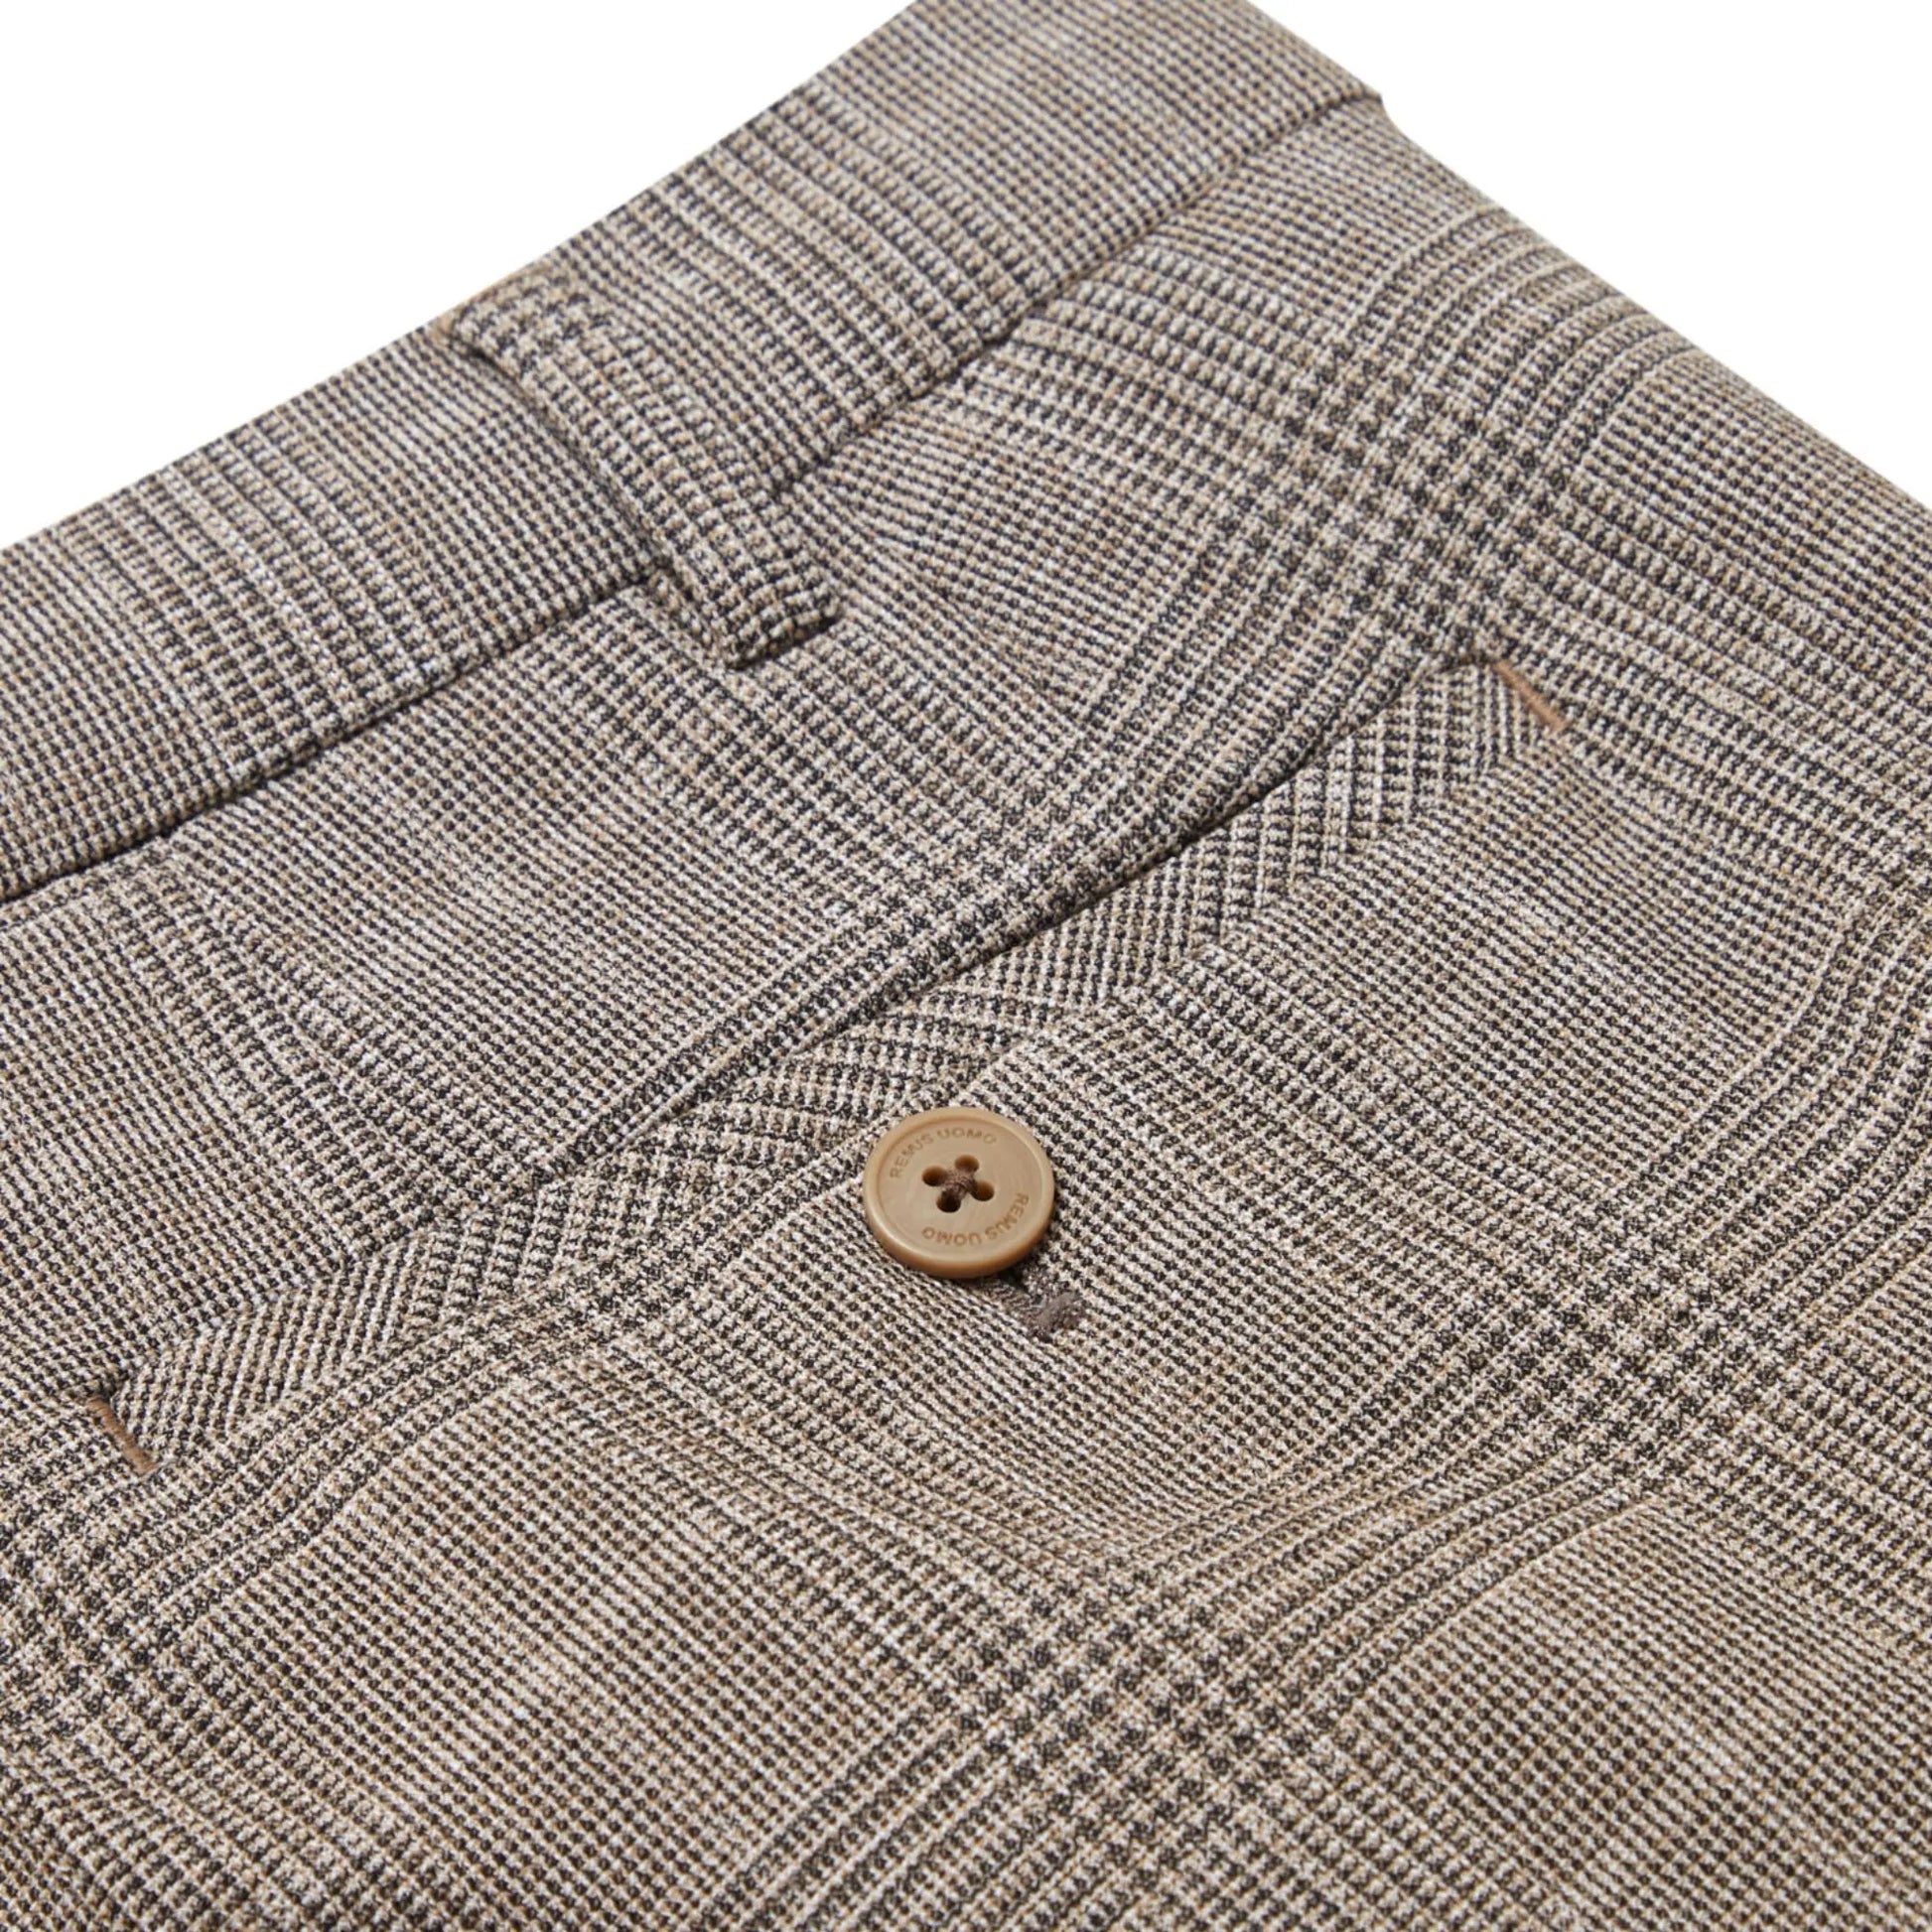 Buy Remus Uomo Matteo Prince of Wales Suit Trousers - Brown | Suit Trouserss at Woven Durham